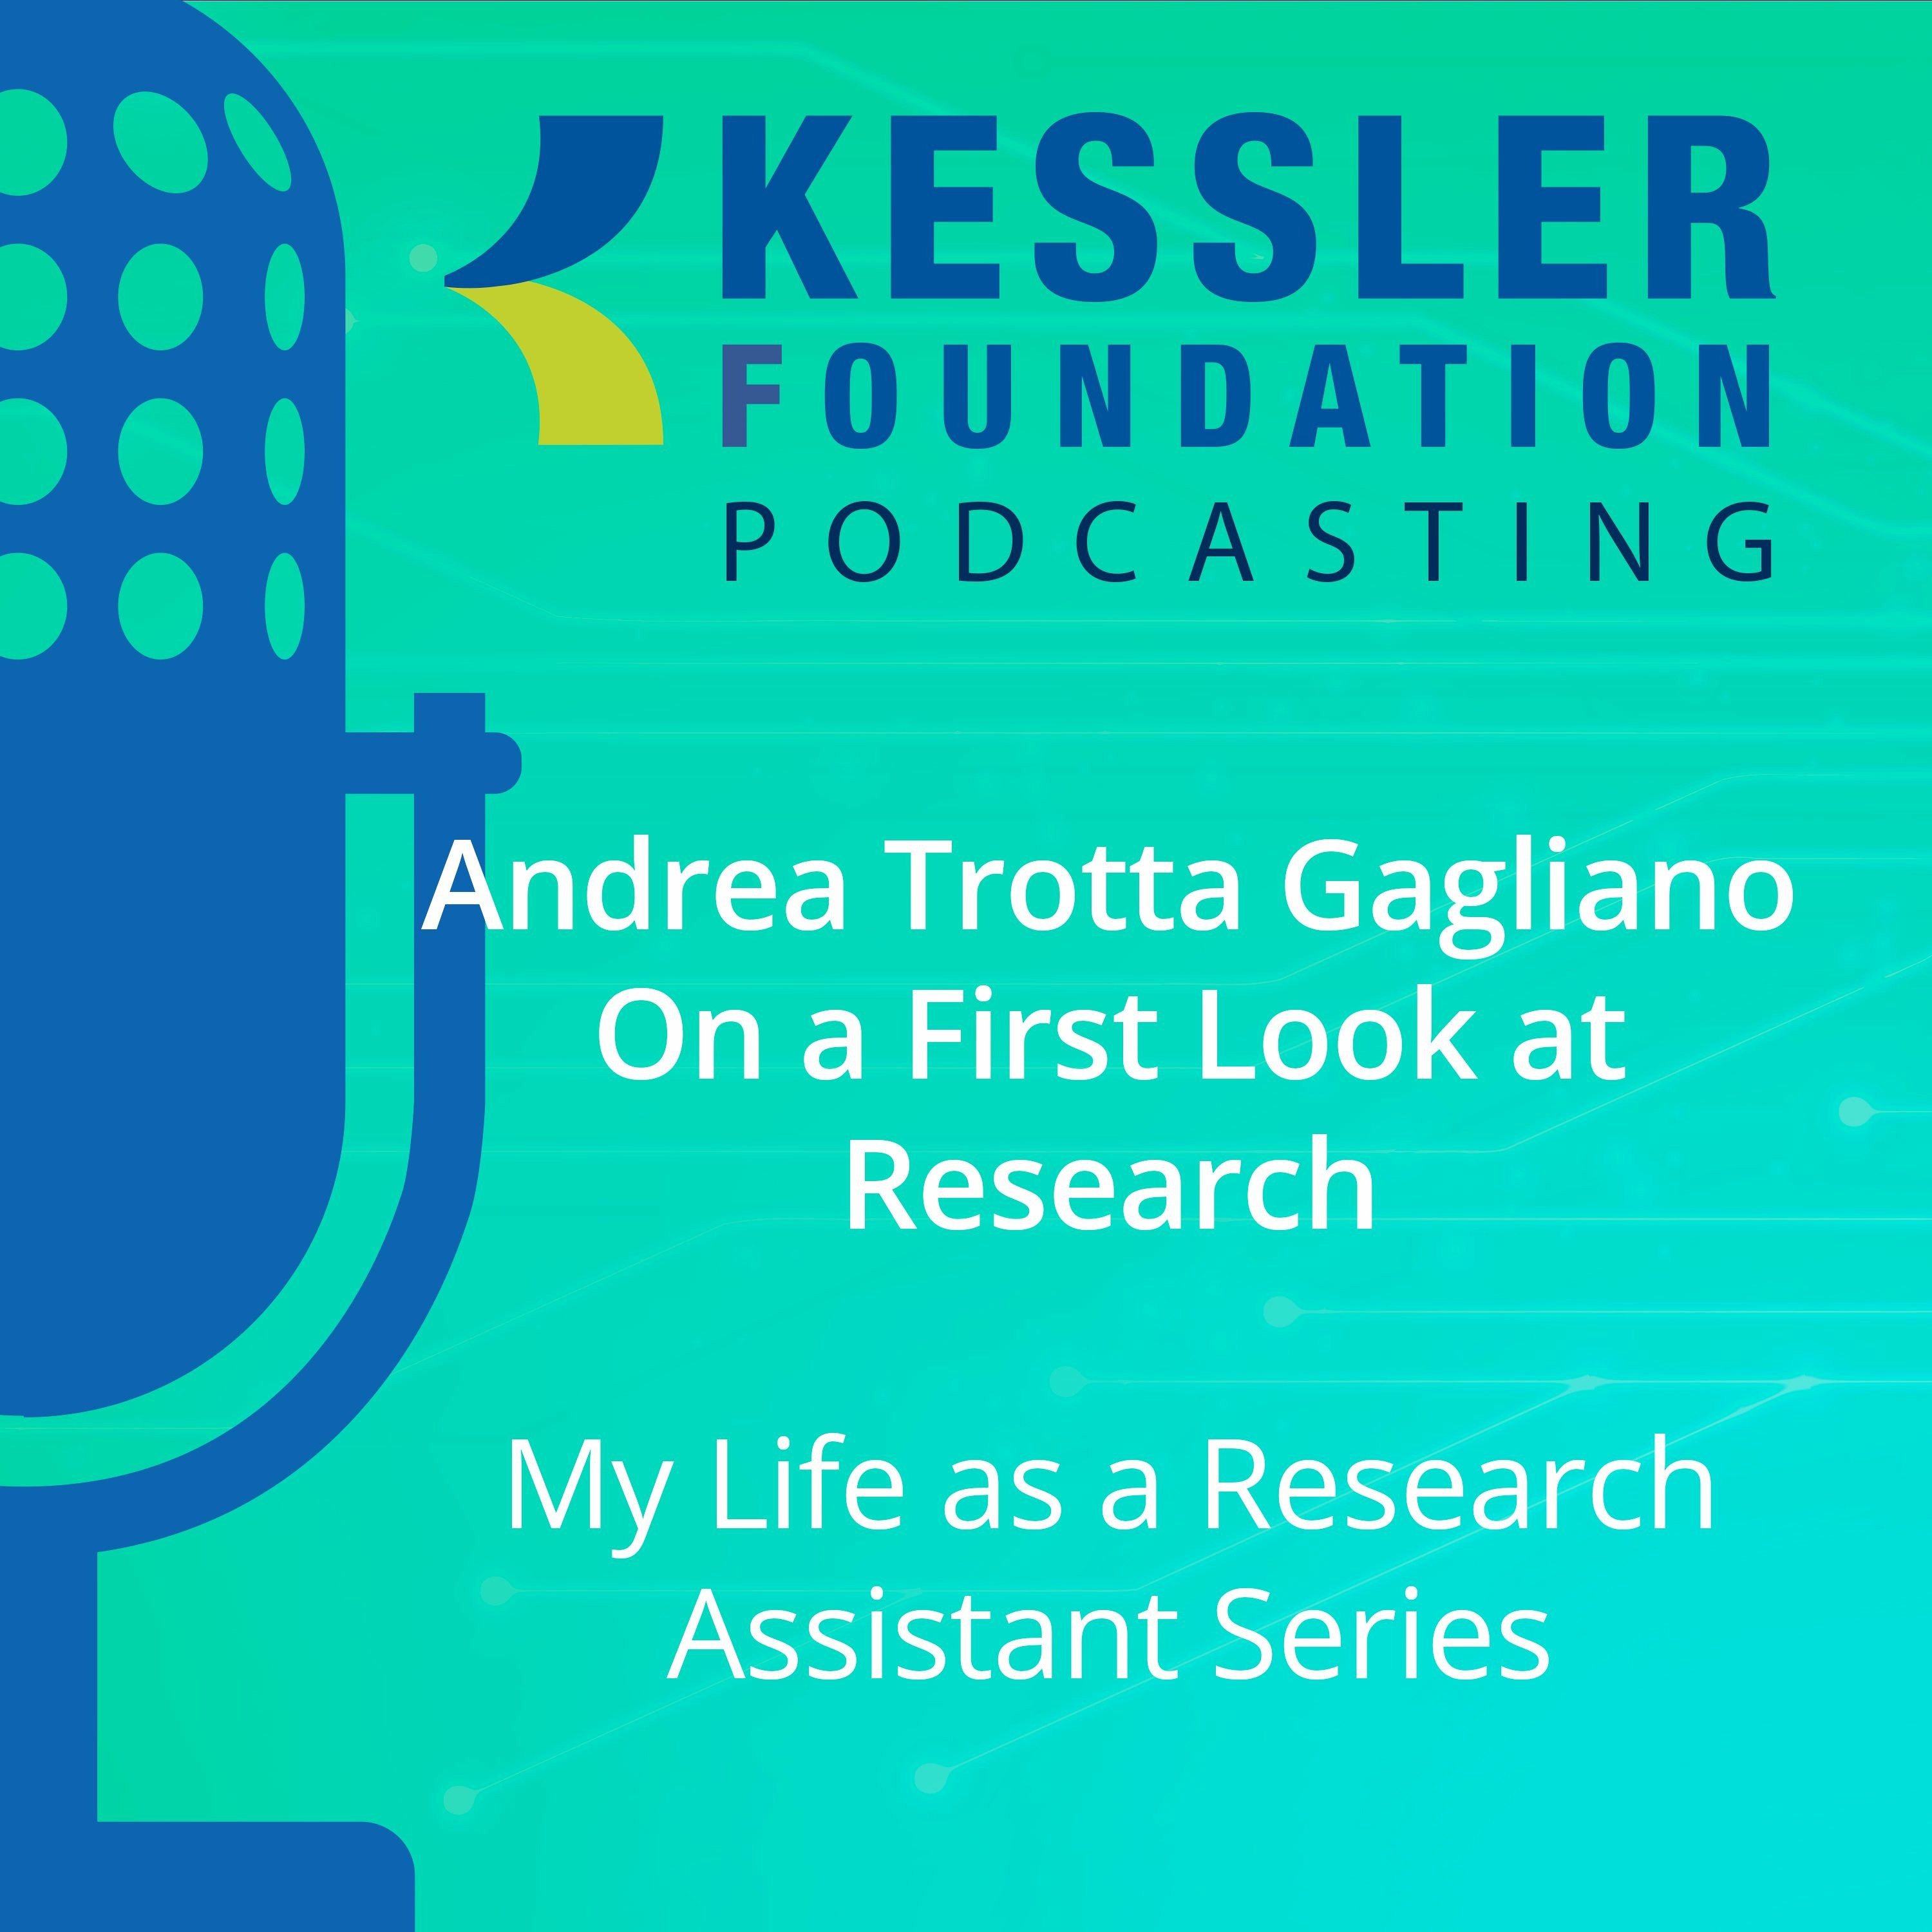 Andrea Trotta Gagliano On A First Look at TBI Research